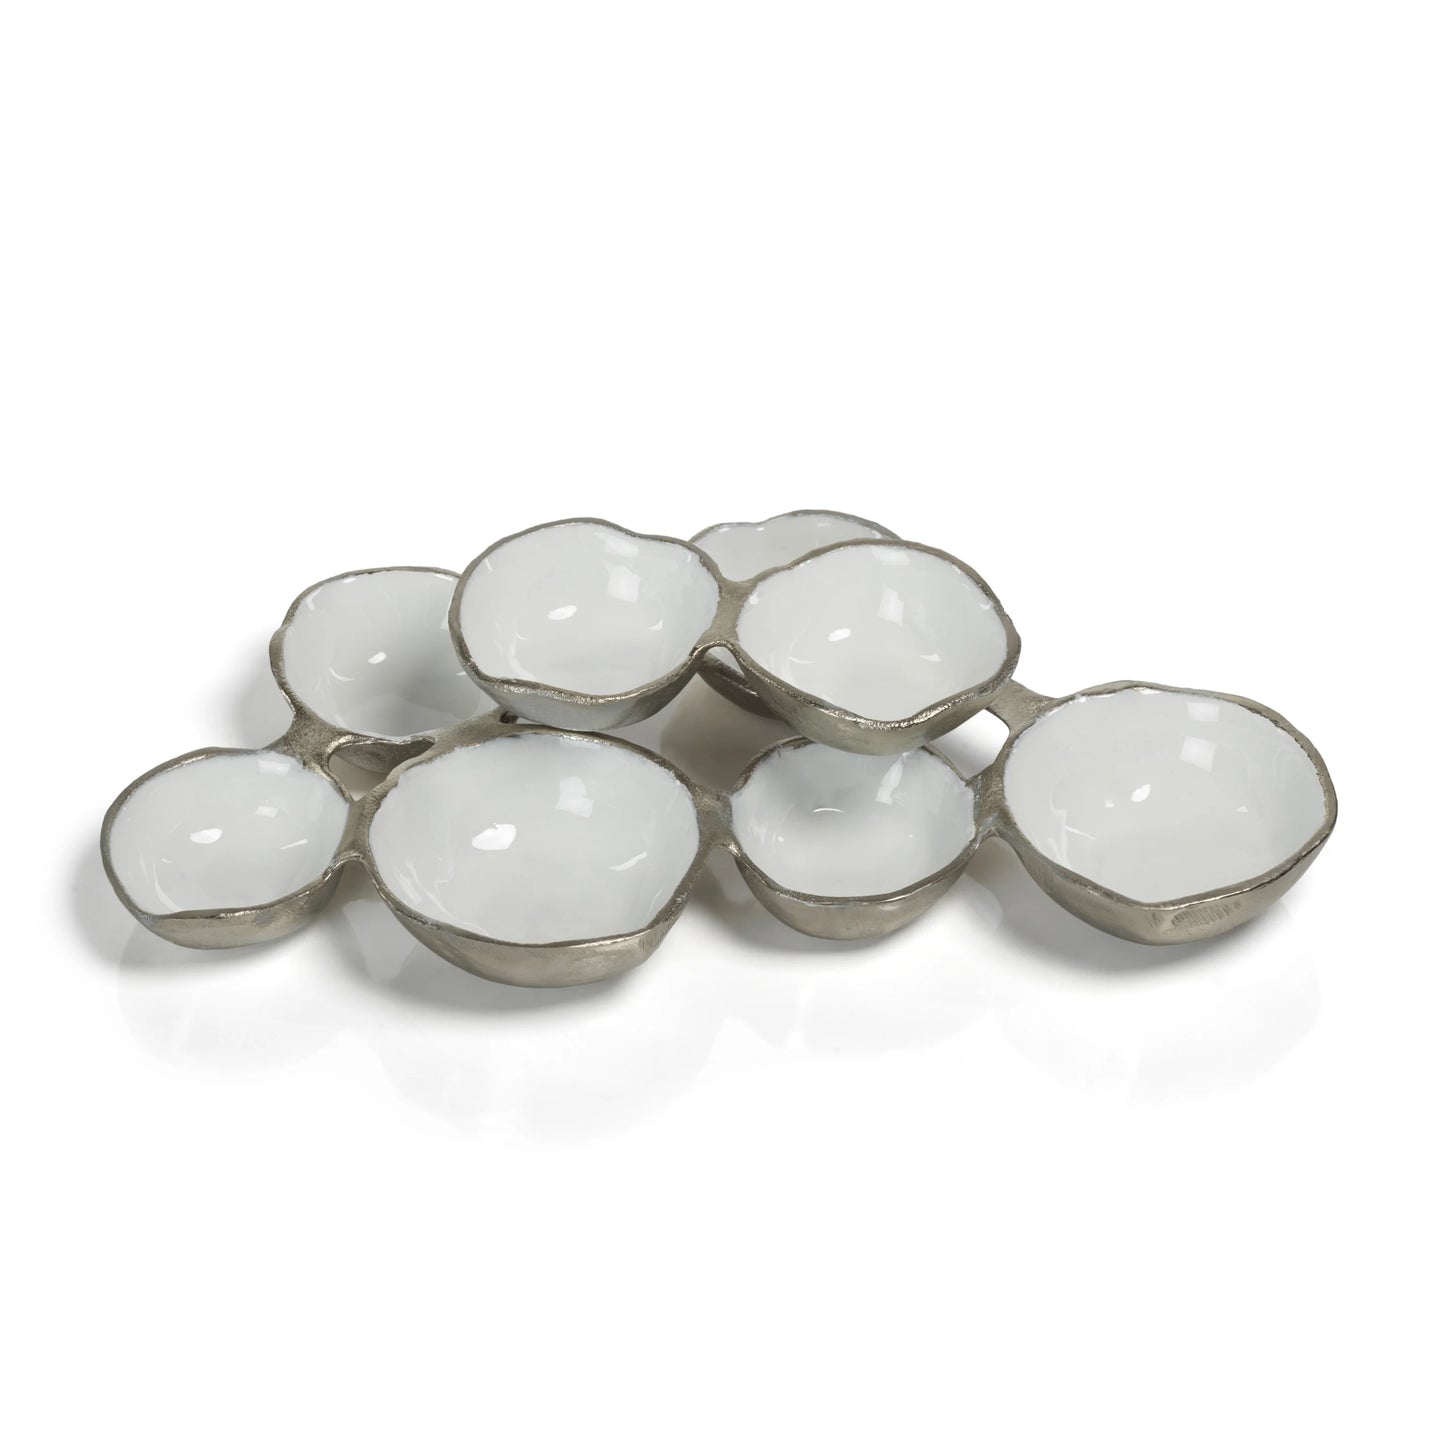 Charcuterie Serving Bowls Cluster of 8 Small Nickel and White